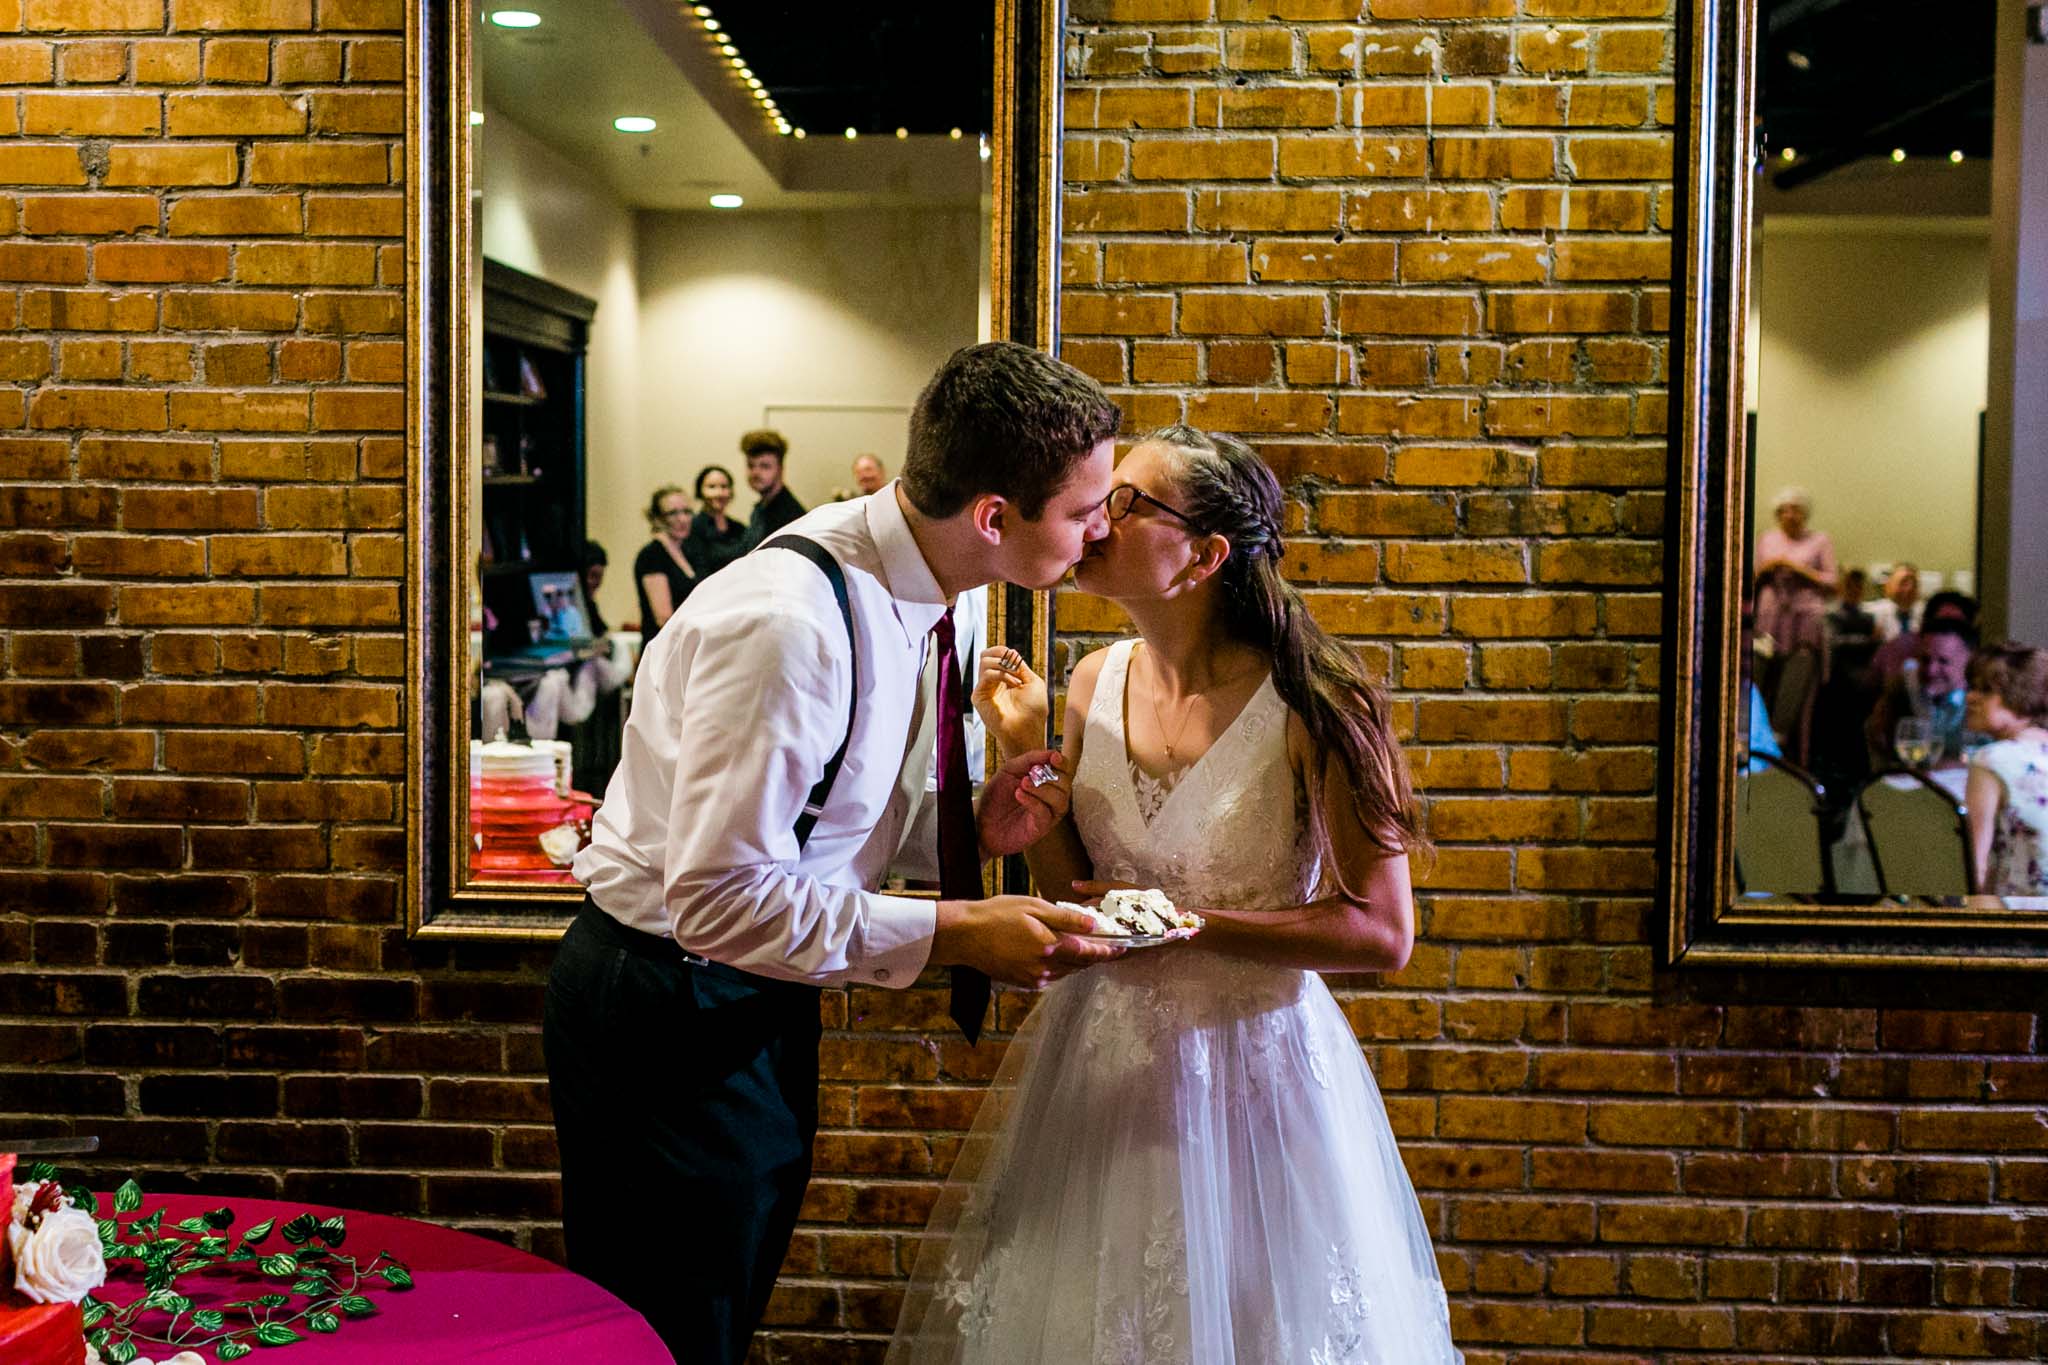 Bride and groom feeding cake to each other | Raleigh Wedding Photographer | By G. Lin Photography